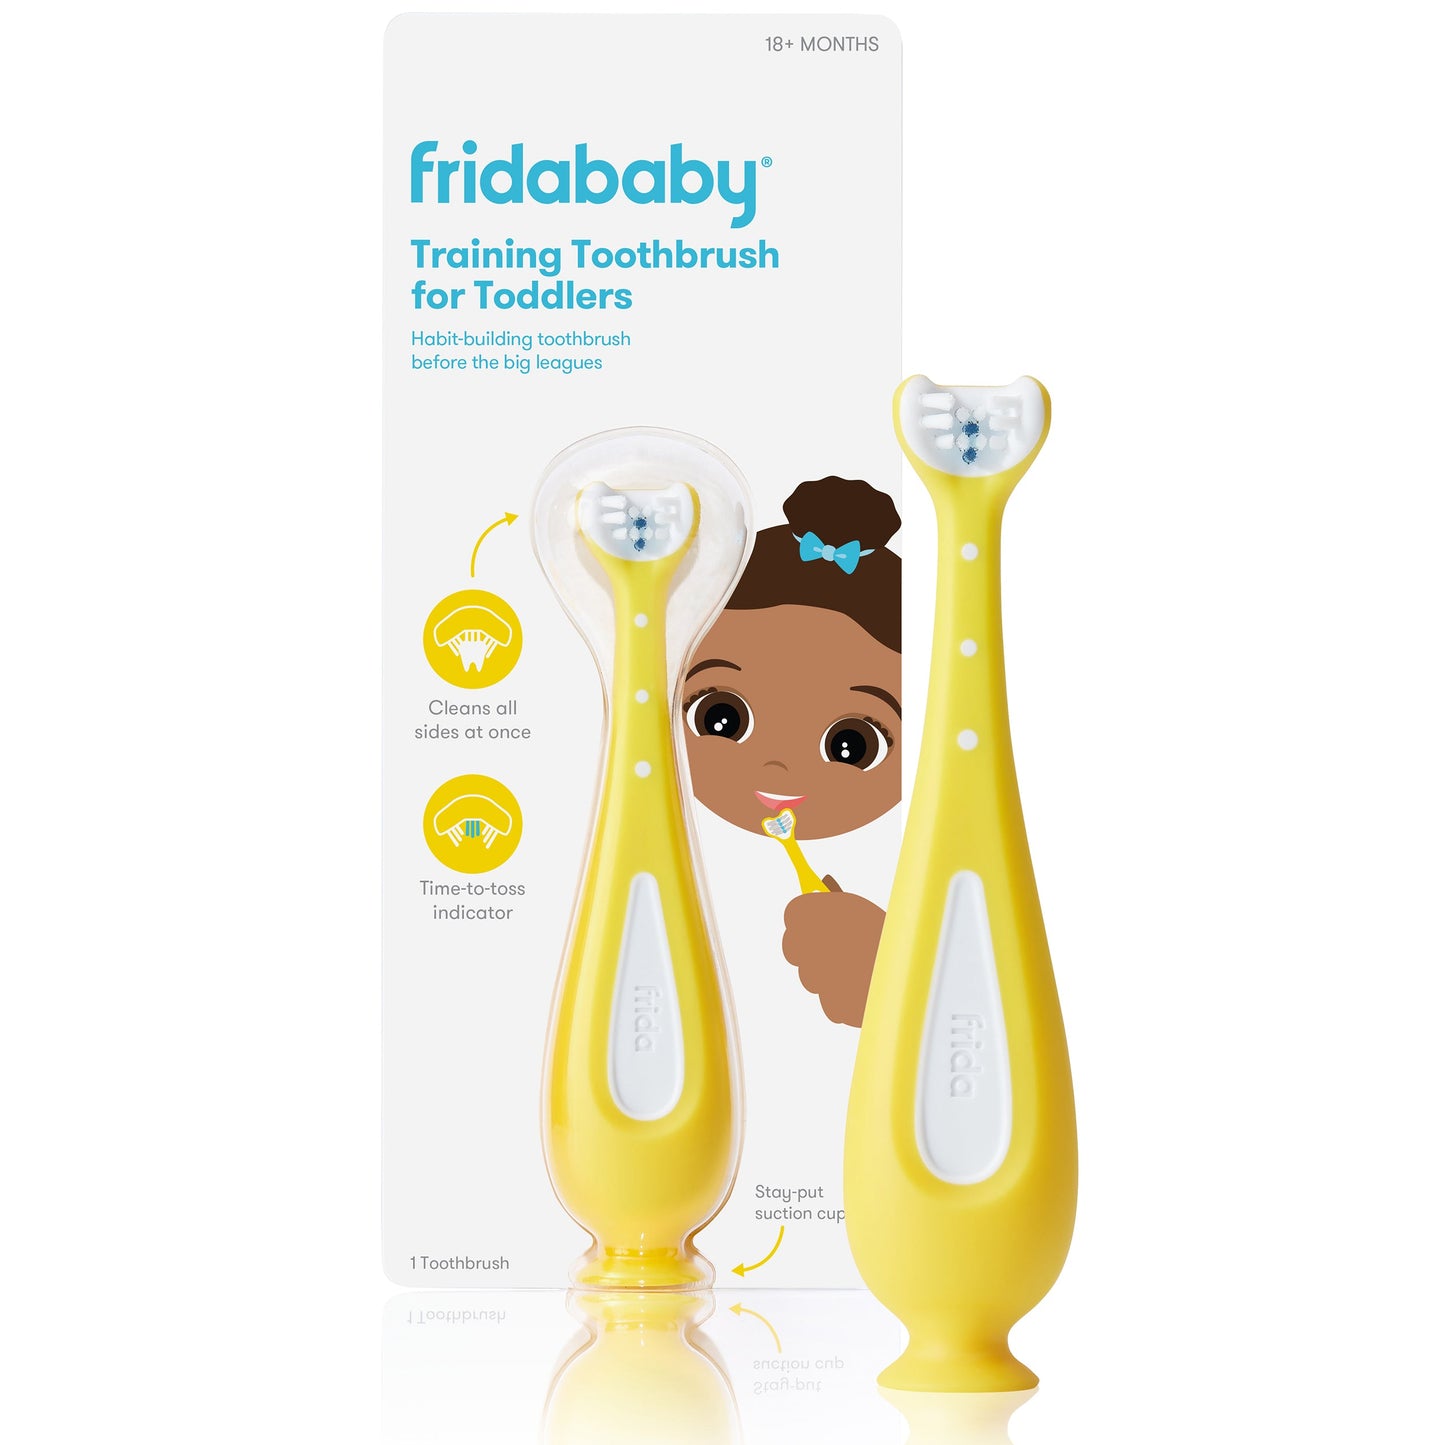 Training Toothbrush for Toddlers